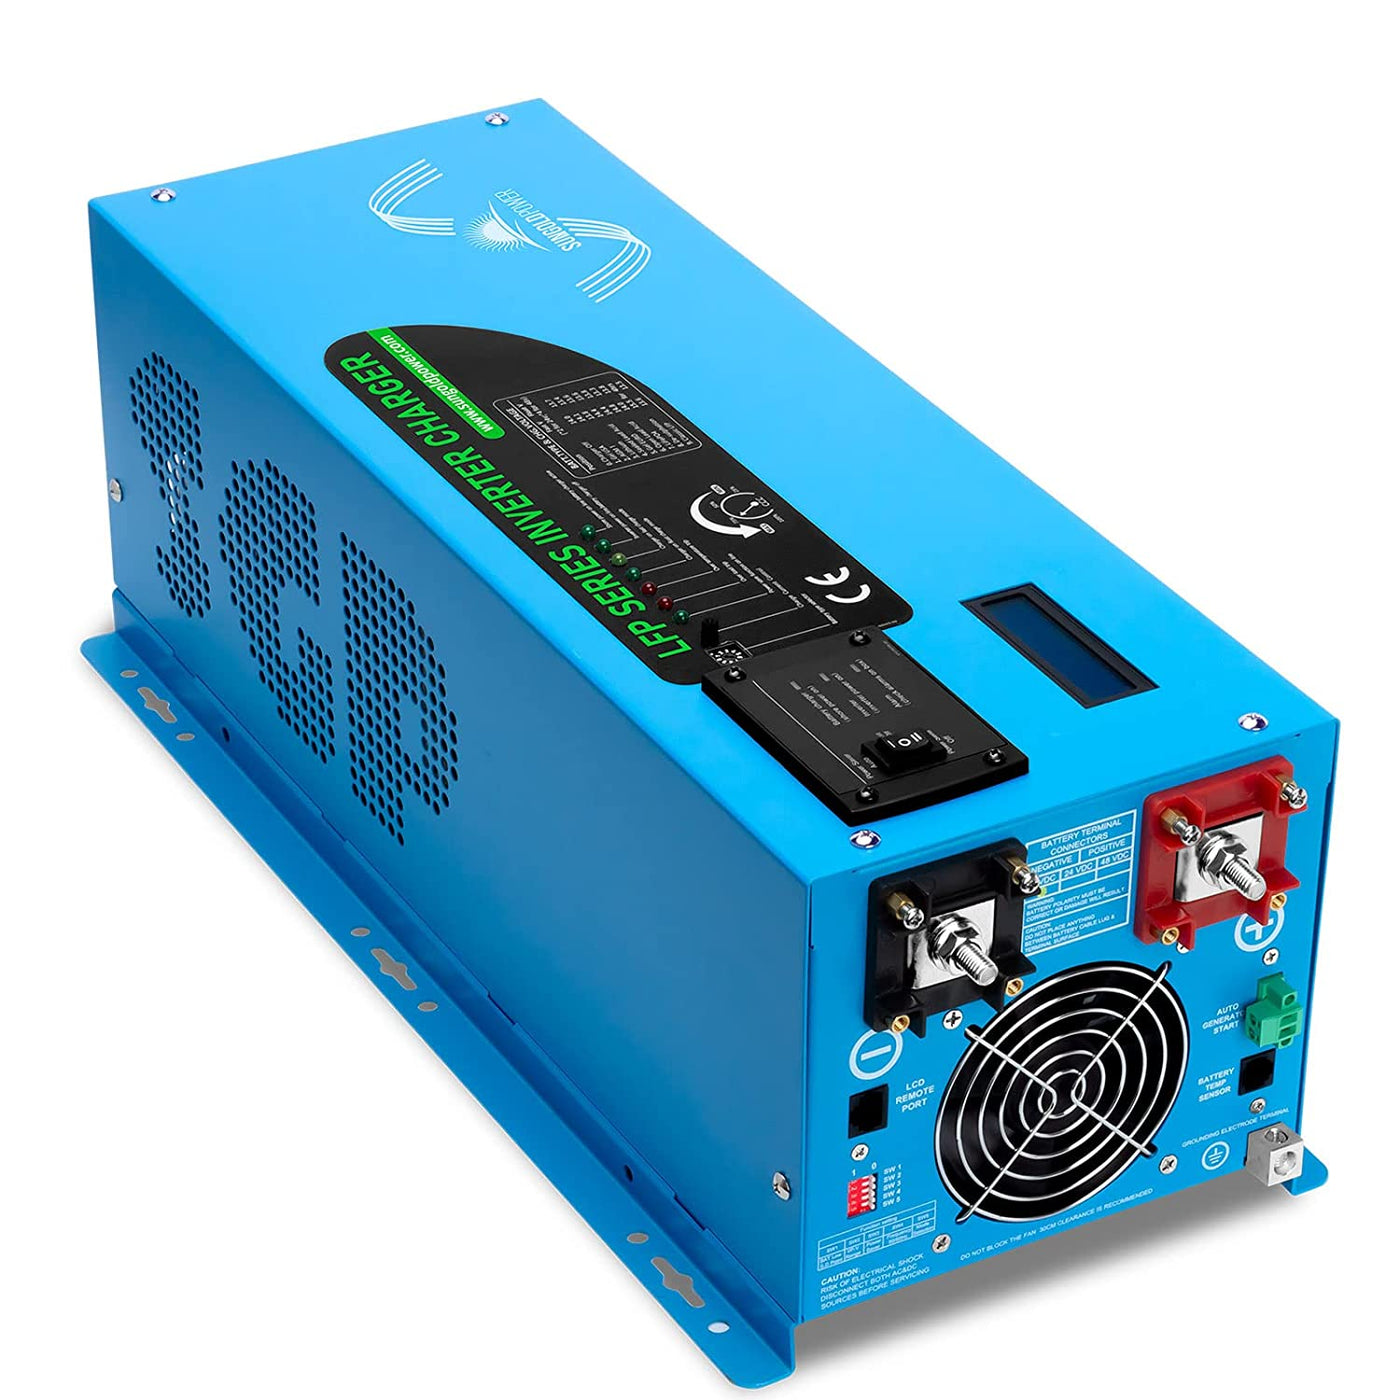 SUNGOLDPOWER 2000W DC 24V Peak 6000W Pure Sine Wave Power Inverter Charger - $400